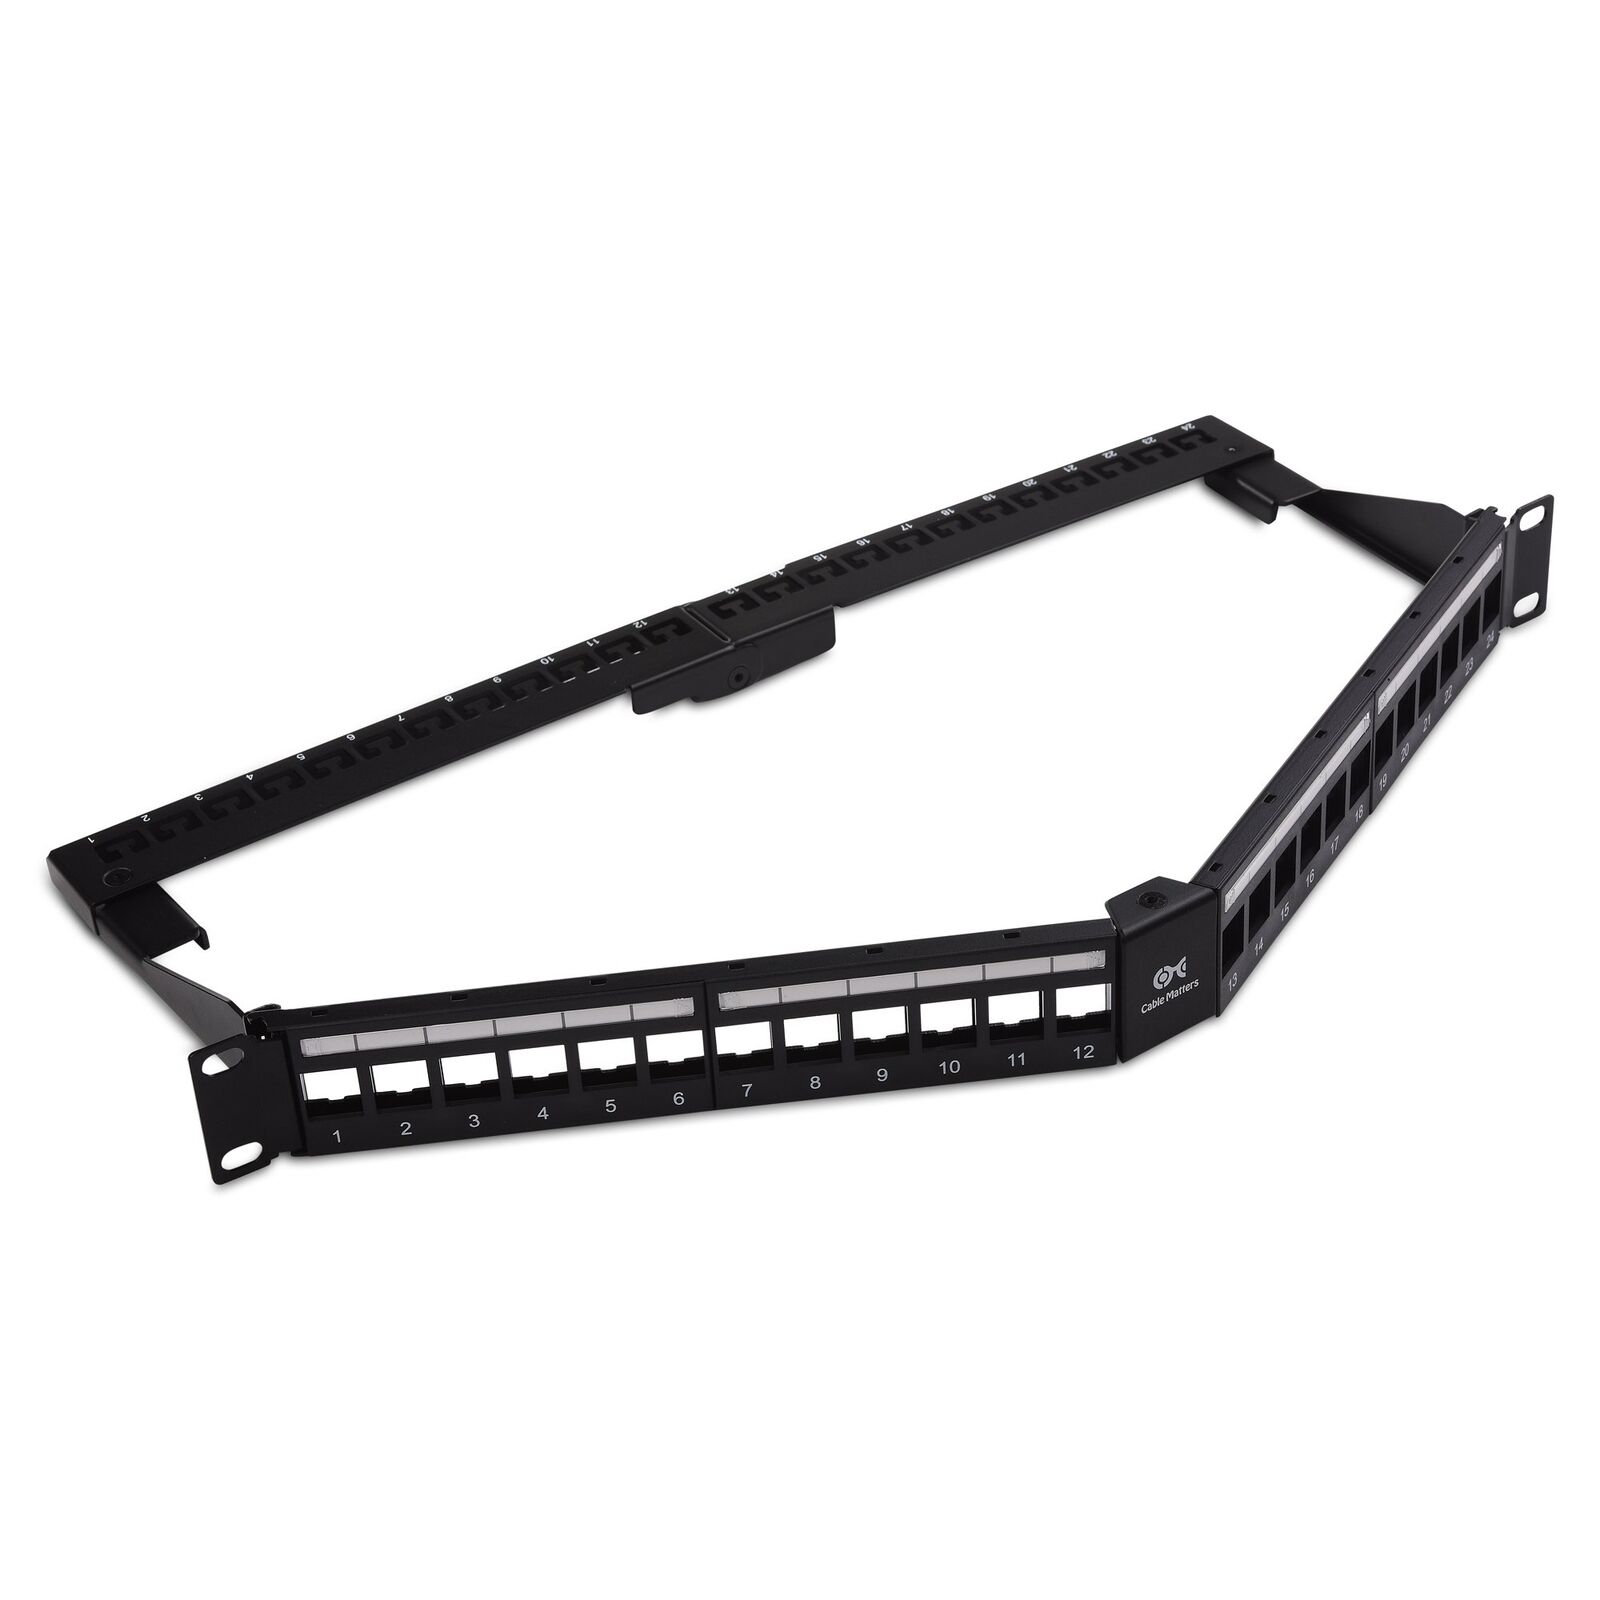 Cable Matters 24-Port Keystone Jack Blank 19” Angled Patch Panel